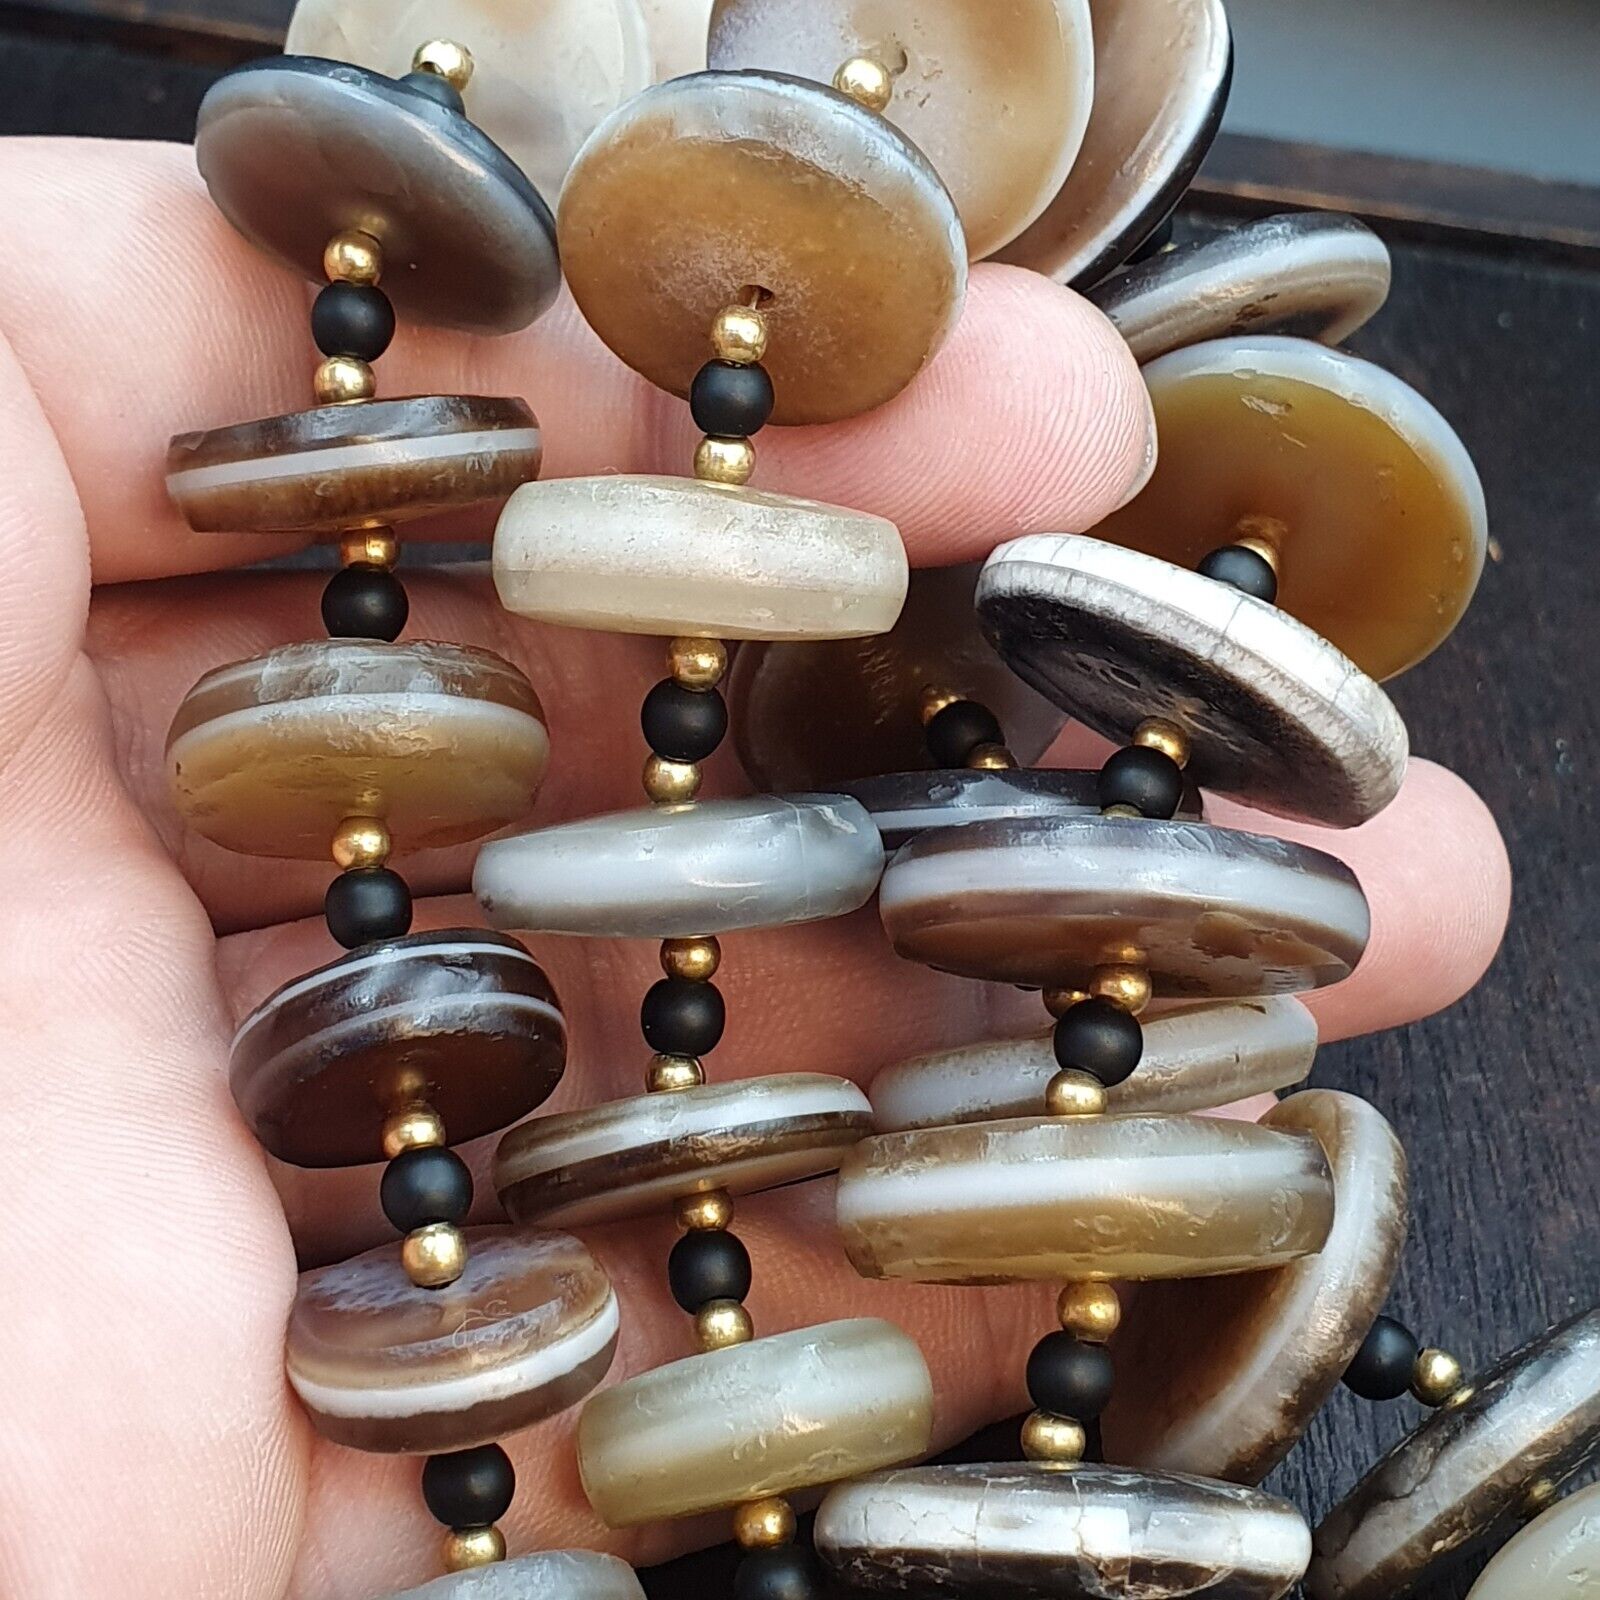 VERY RARE COLLECTION ANCIENT AGATE STONE 1 Line DISC India Himalia Beads Necklac